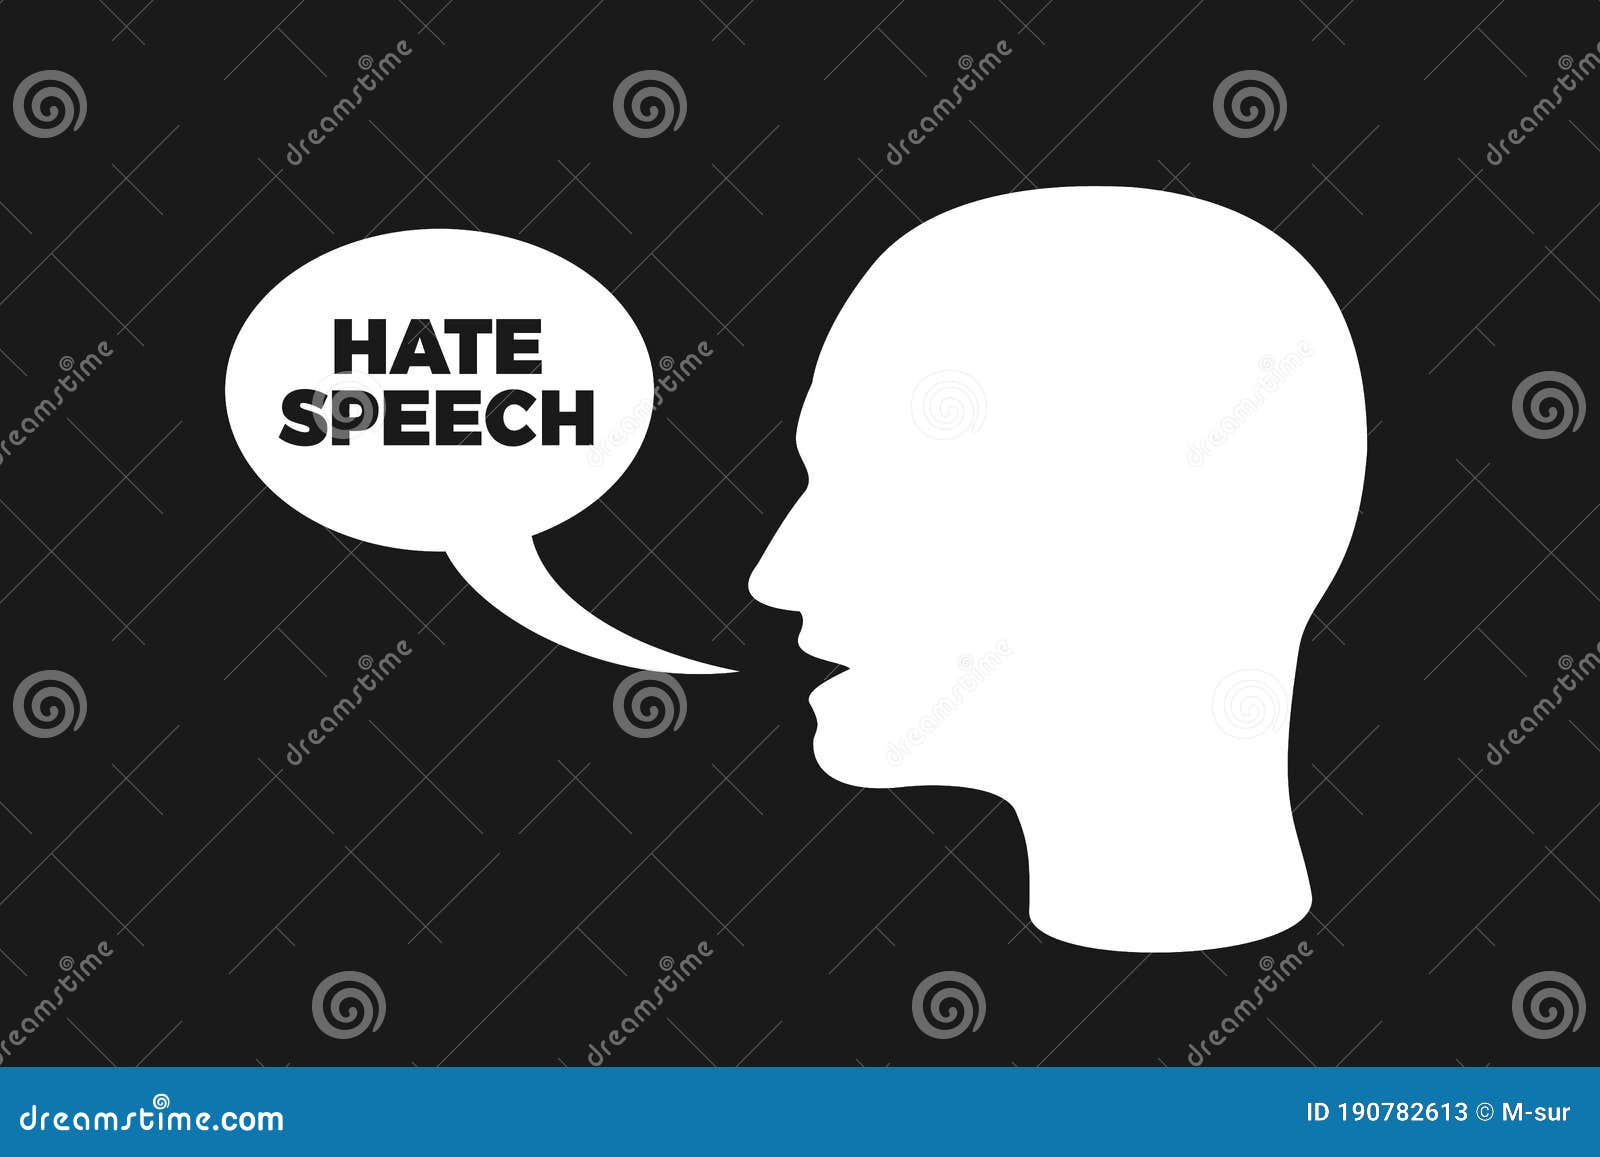 Hate speech - islhouette of man is doing offensive and violent talk and speaking